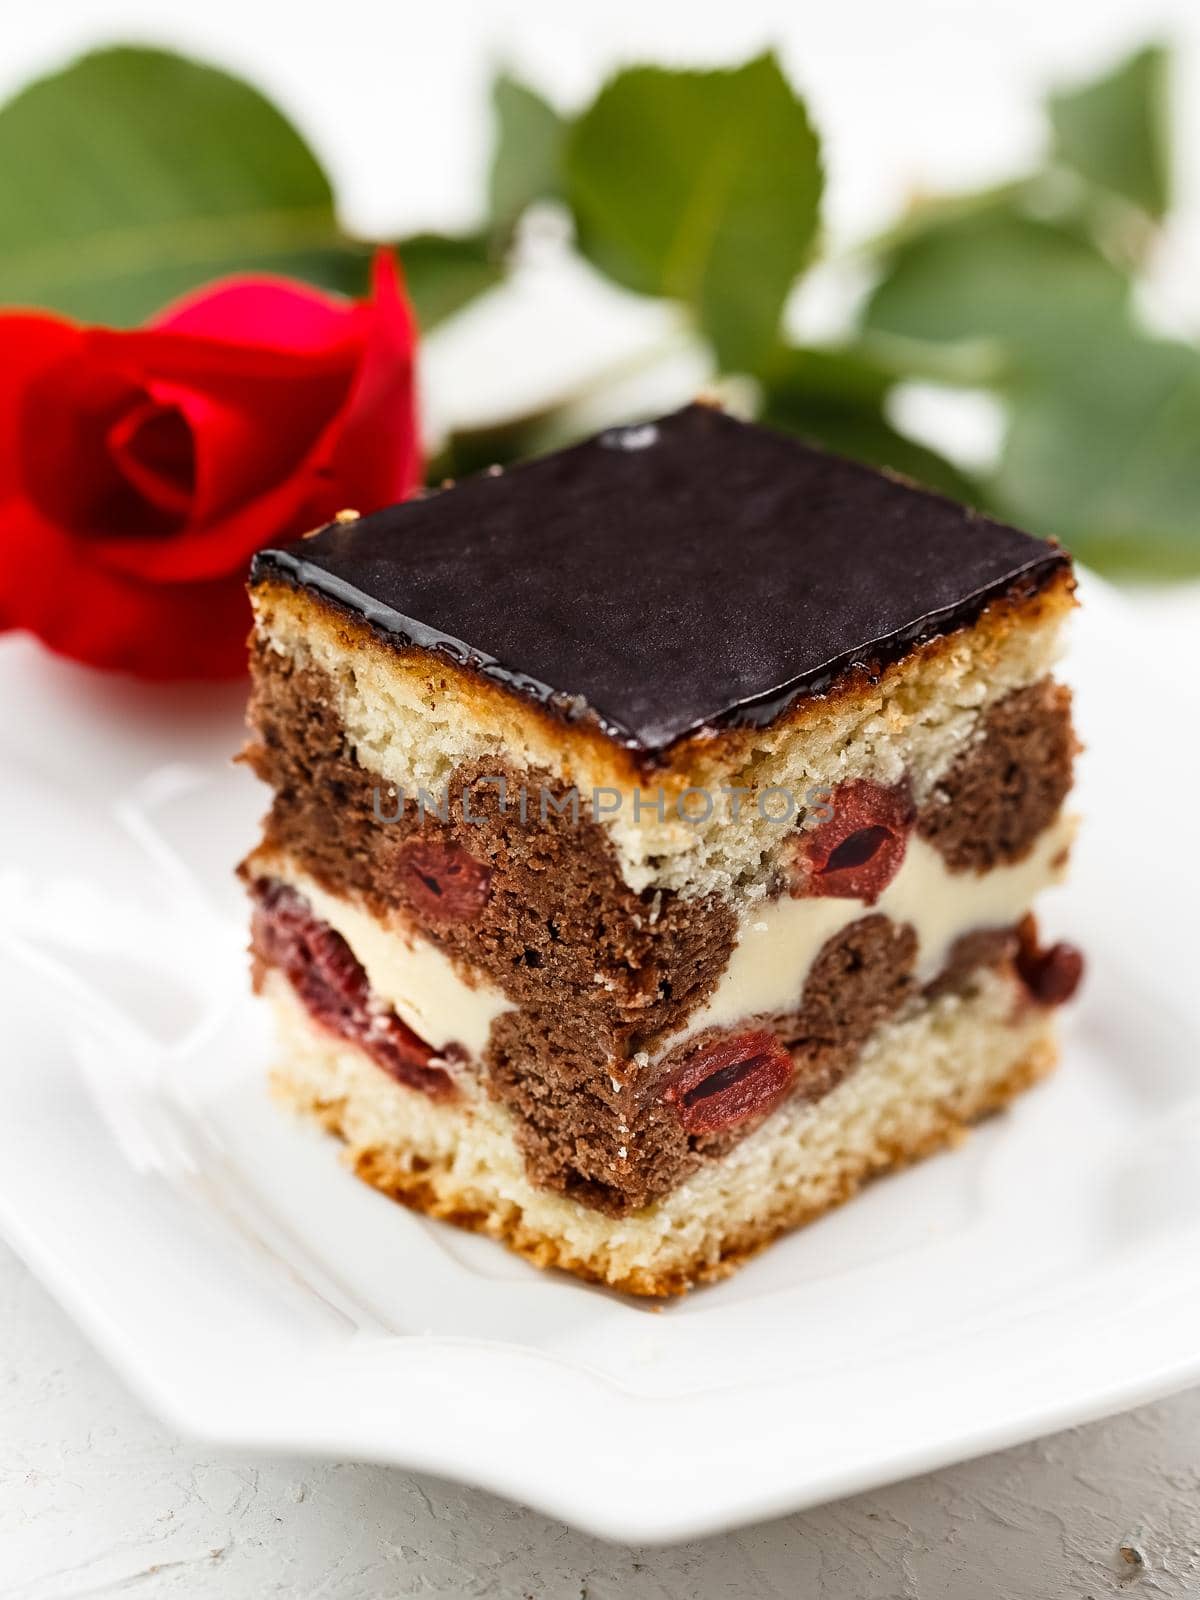 Cherry Cake with Chocolate Glazing. Piece of Cake on a Plate with red rose on the background. Romantic dinner concept